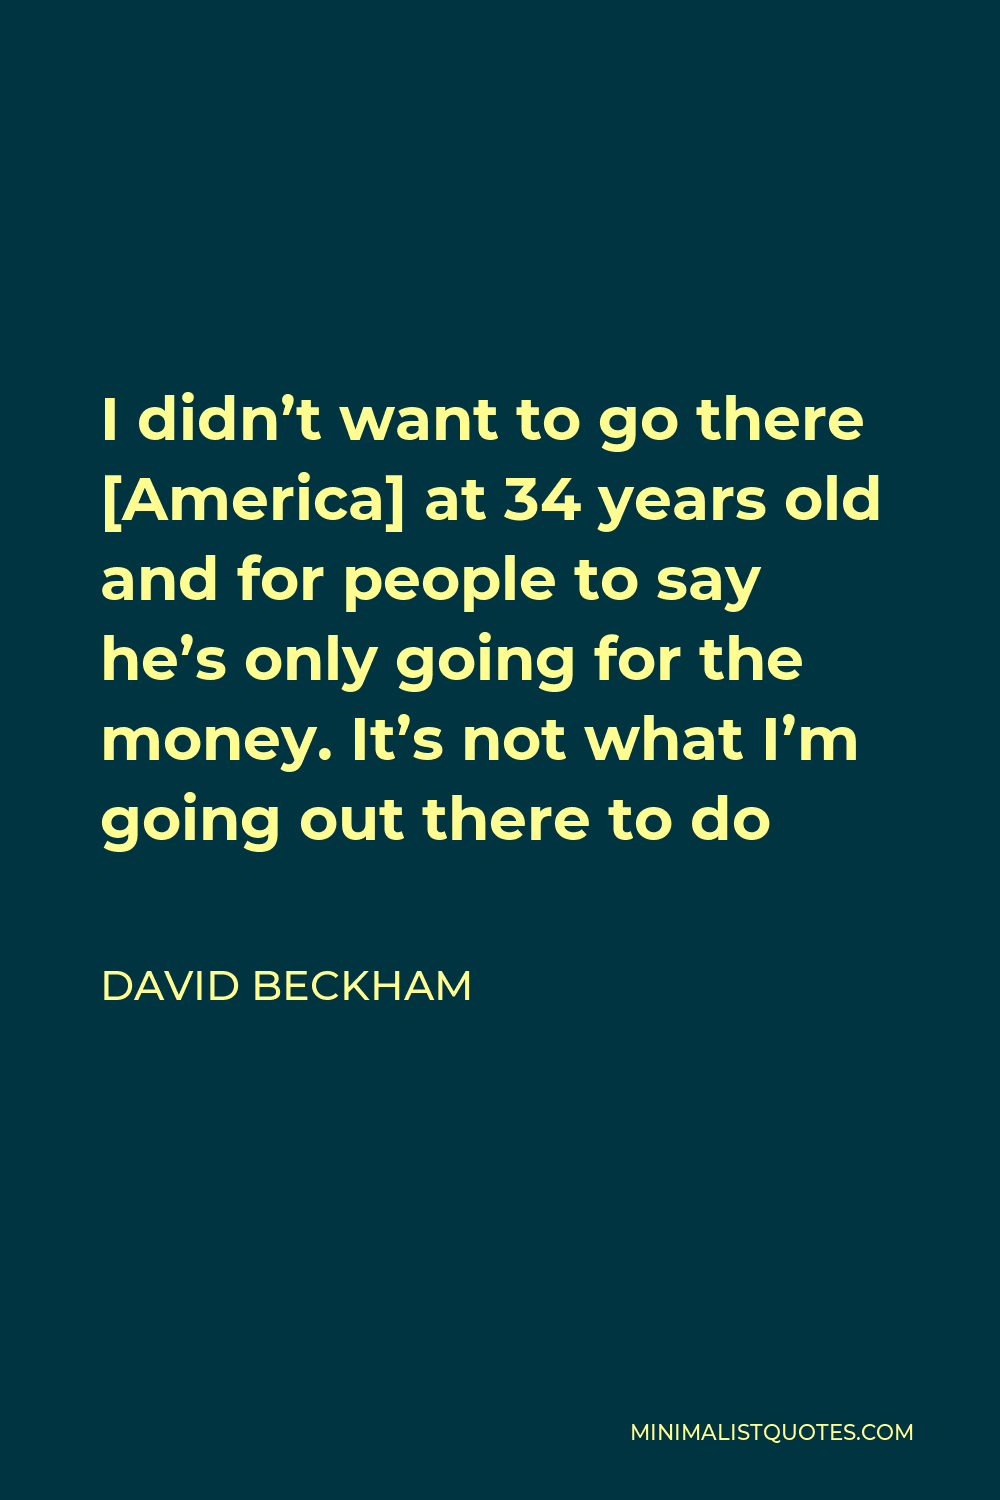 David Beckham Quote - I didn’t want to go there [America] at 34 years old and for people to say he’s only going for the money. It’s not what I’m going out there to do